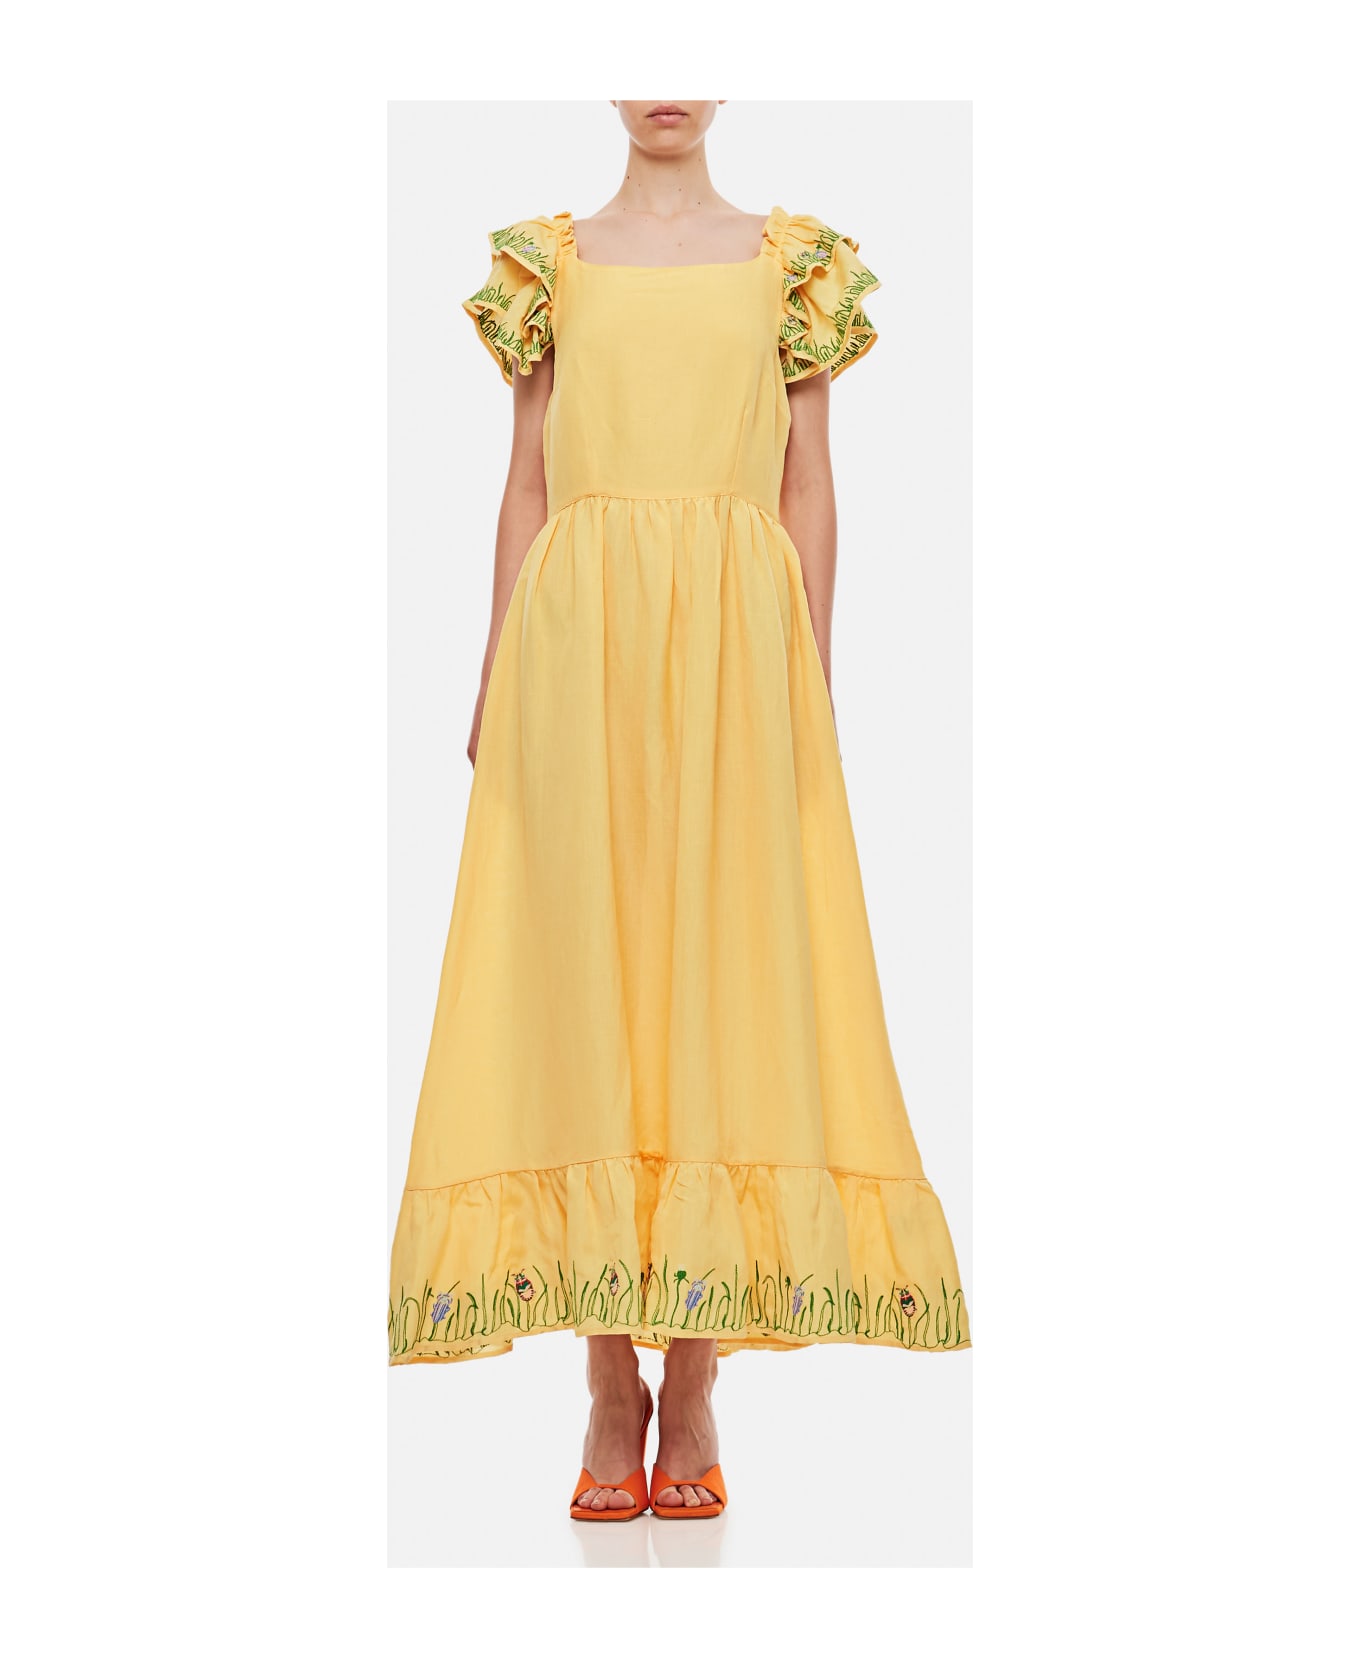 Helmstedt Brise Embroidered Linen Long Dress - Yellow